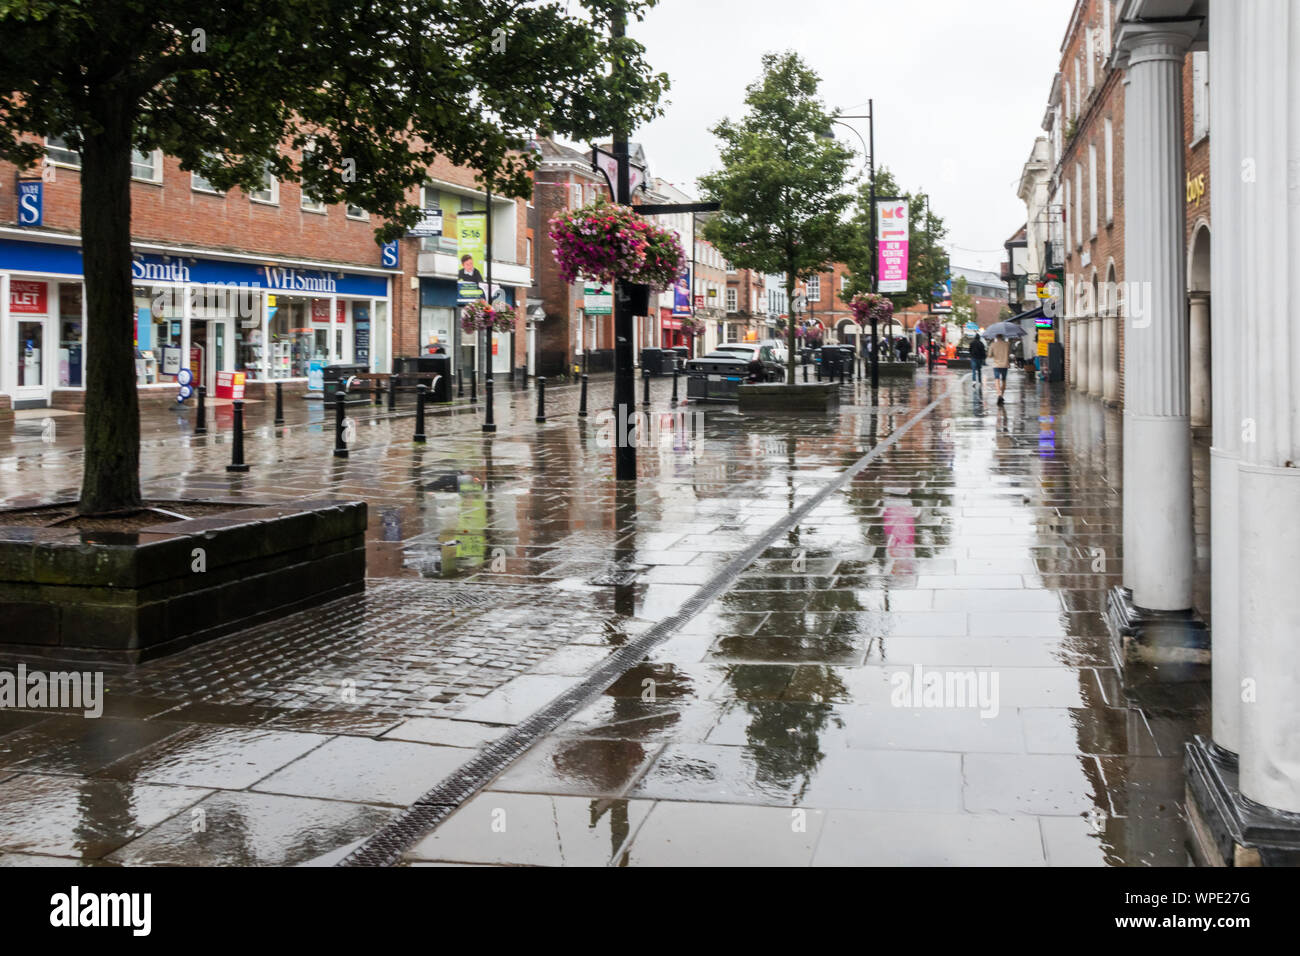 High Wycombe, Engalnd - August 14th 2019: The high street looking towards the Guidhall on a rainy day. Summer rain is not unusual in the UK. Stock Photo